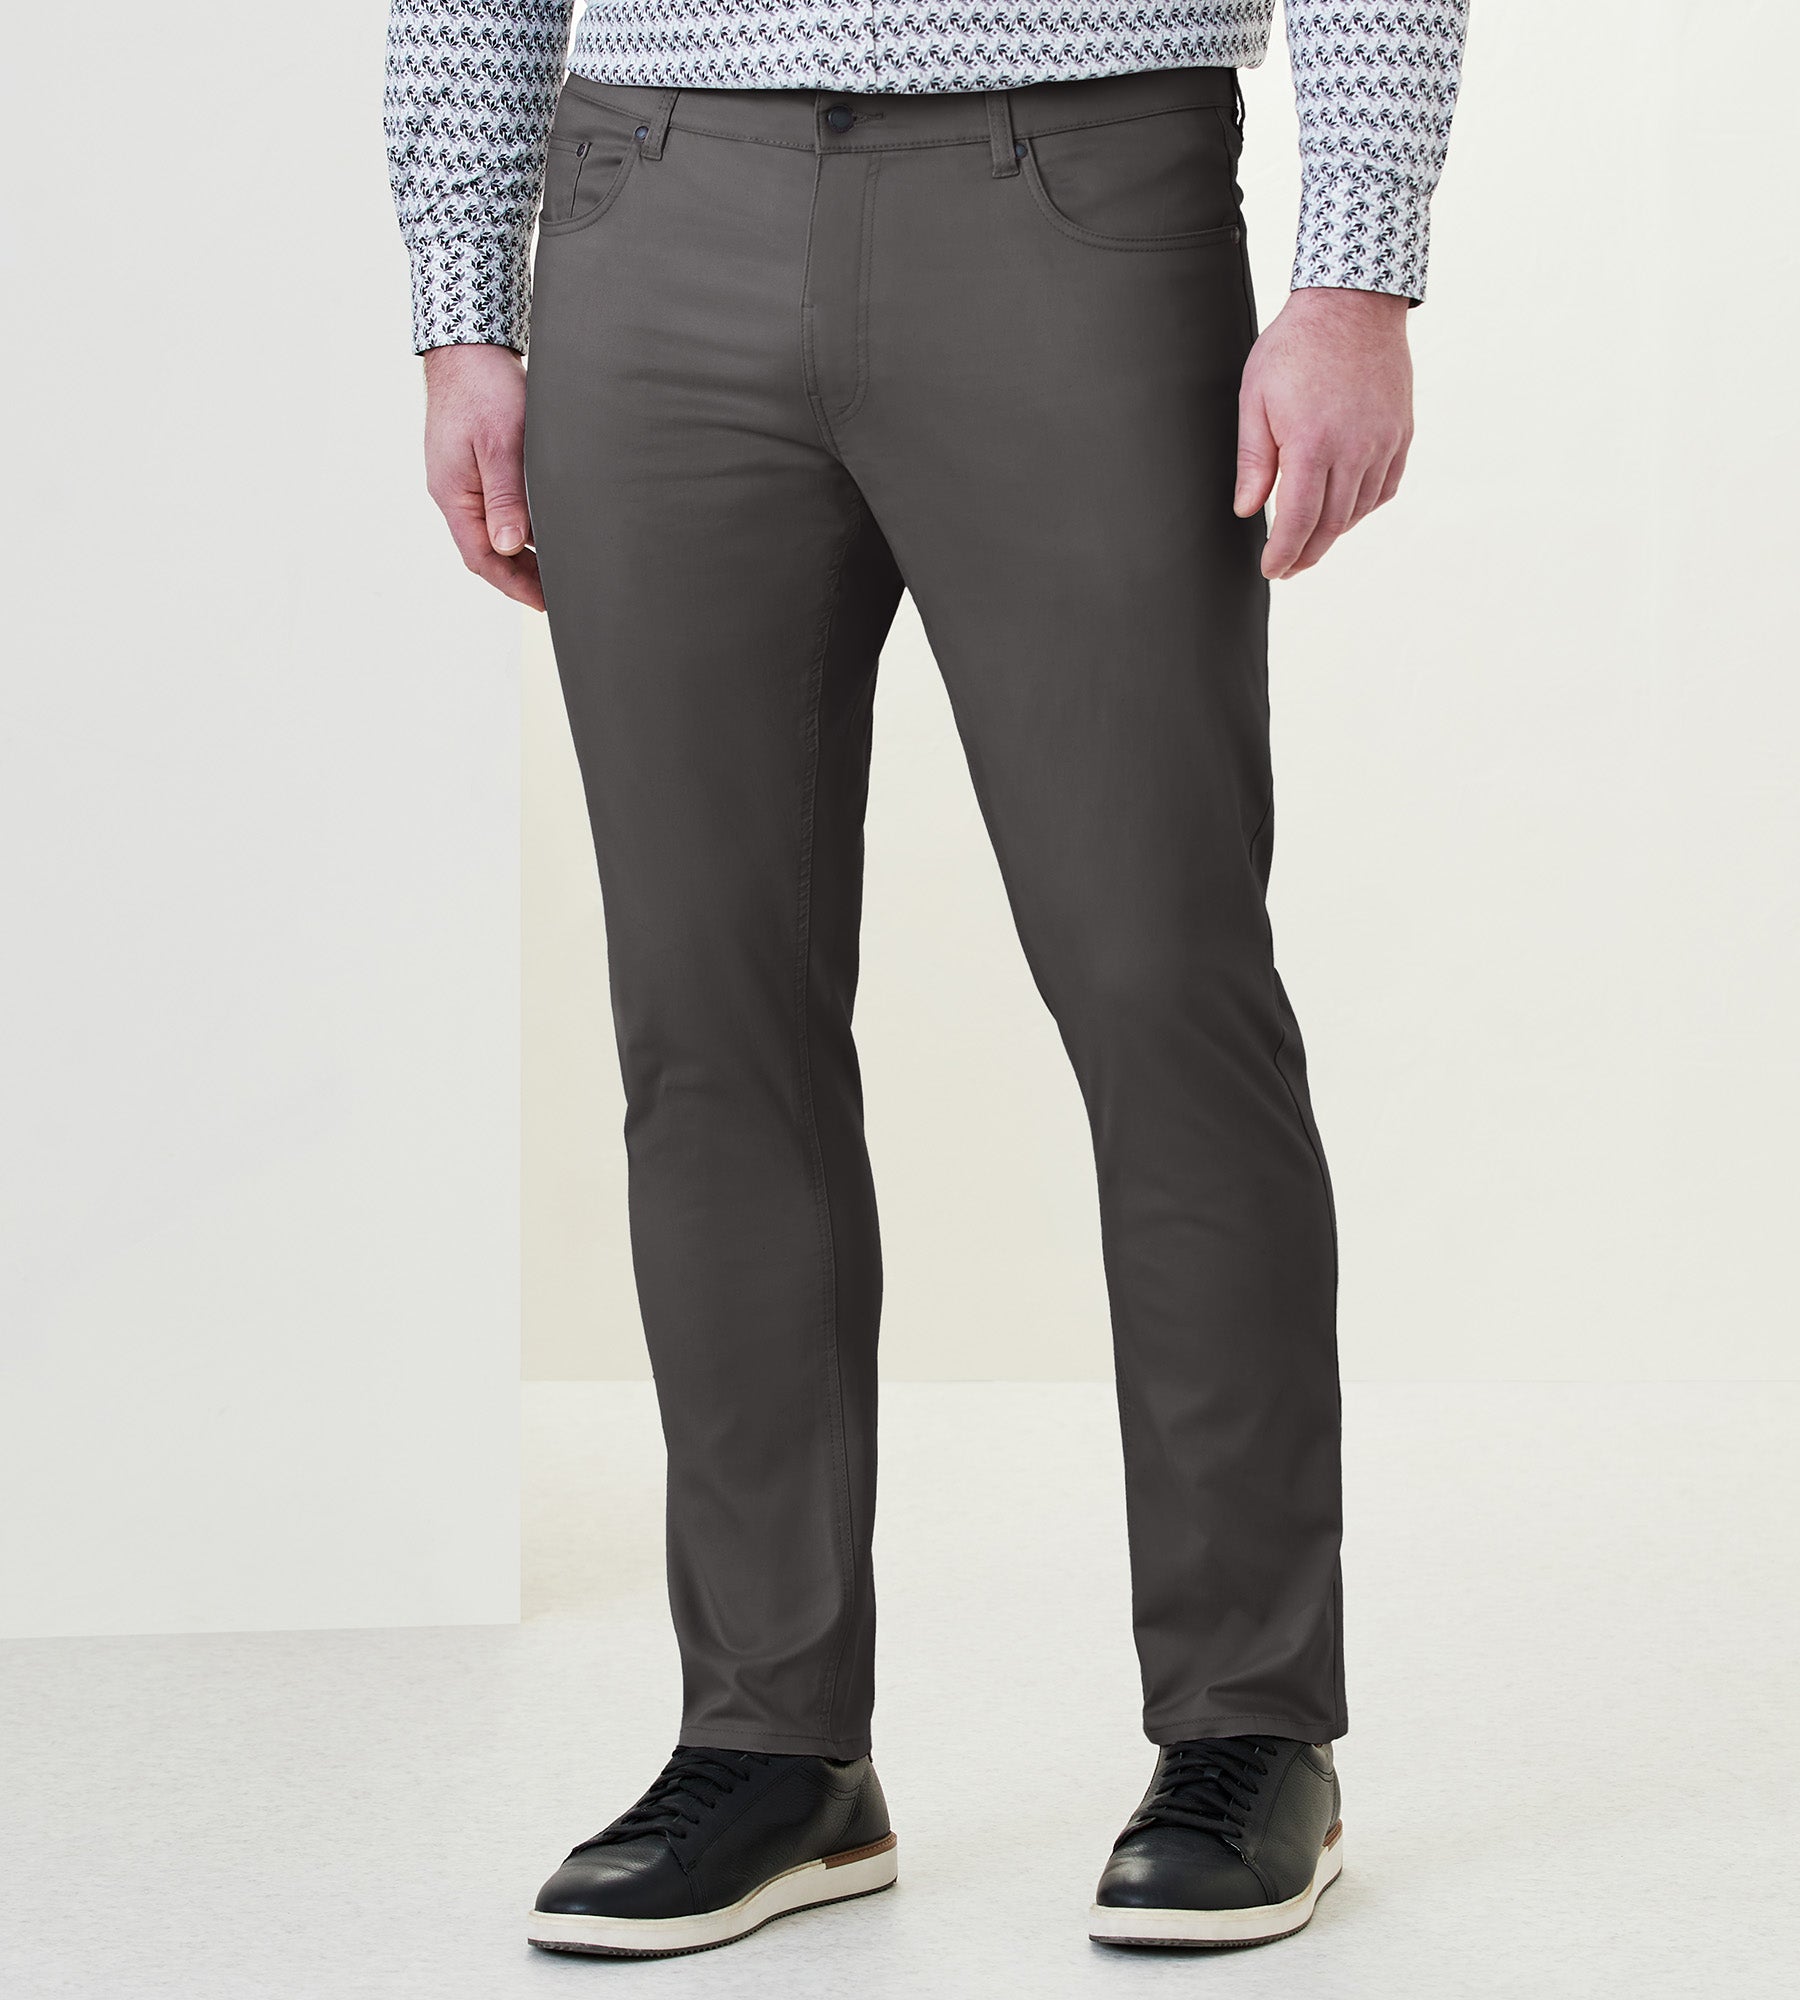 Taylor & Twill Etal Tweed Trousers - Mens from Humes Outfitters